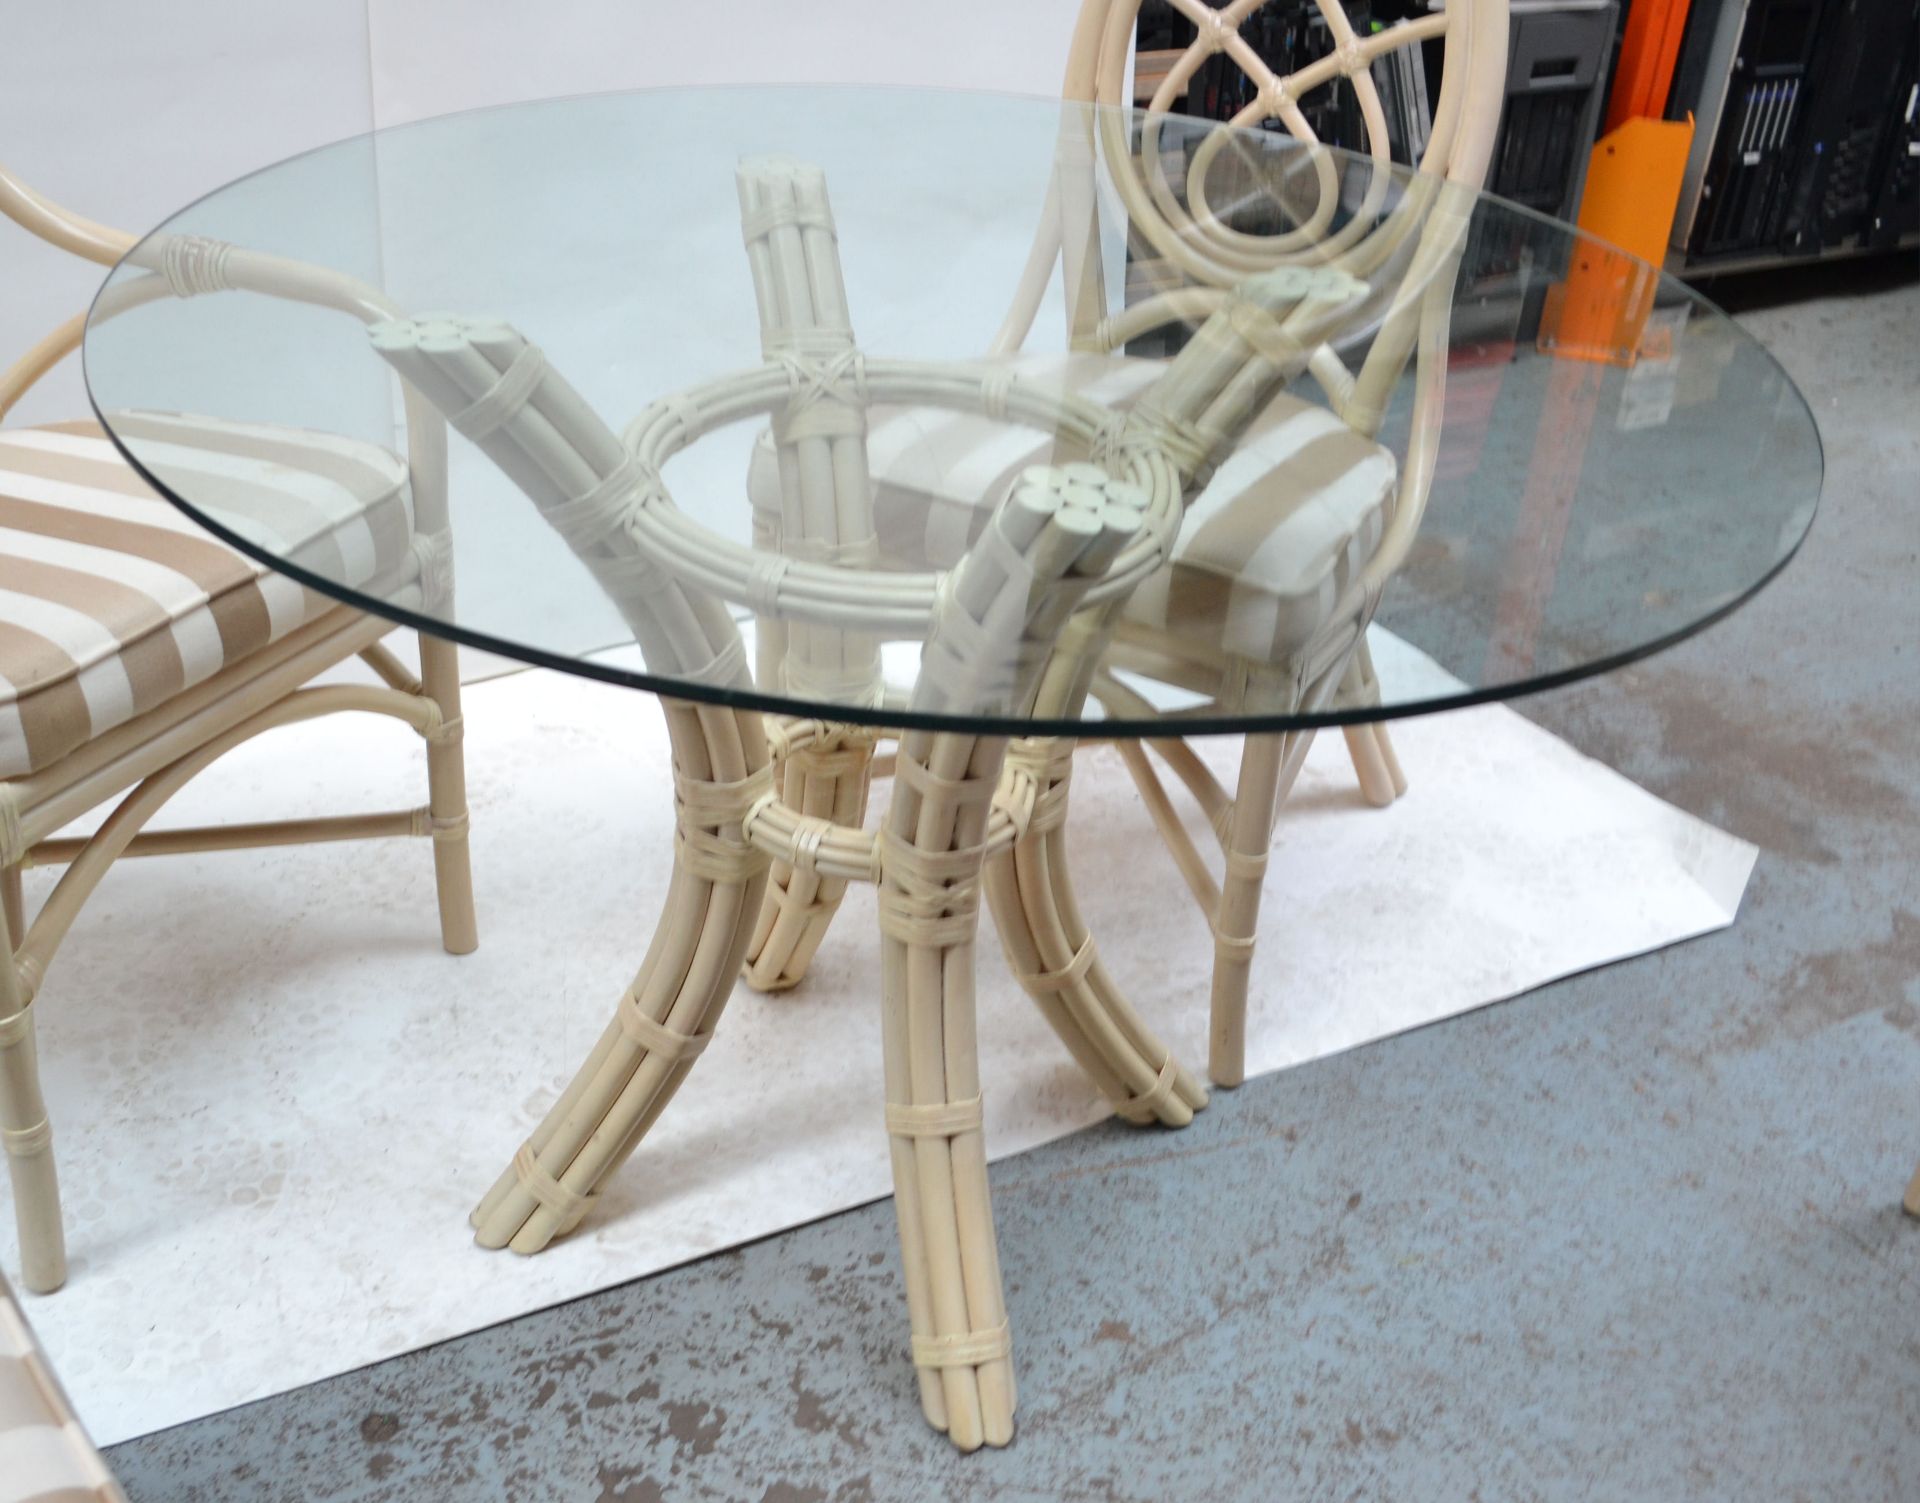 Glass Topped Cane Table with 4 Chairs - AE010 - CL007 - Location: Altrincham WA14 - NO VAT - Image 5 of 14